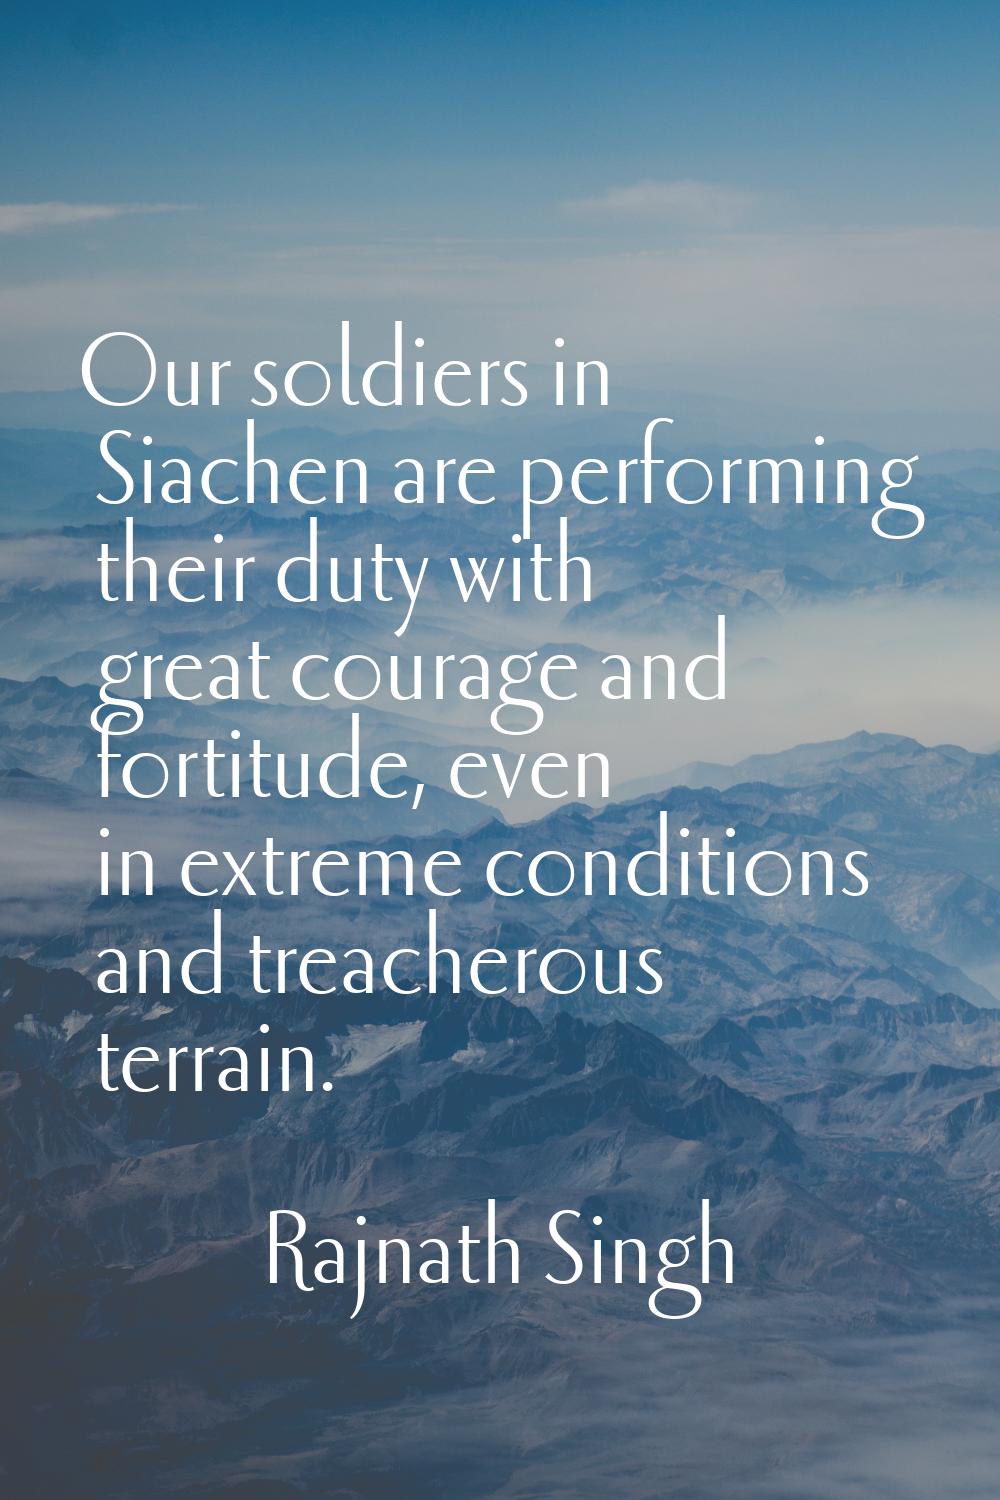 Our soldiers in Siachen are performing their duty with great courage and fortitude, even in extreme